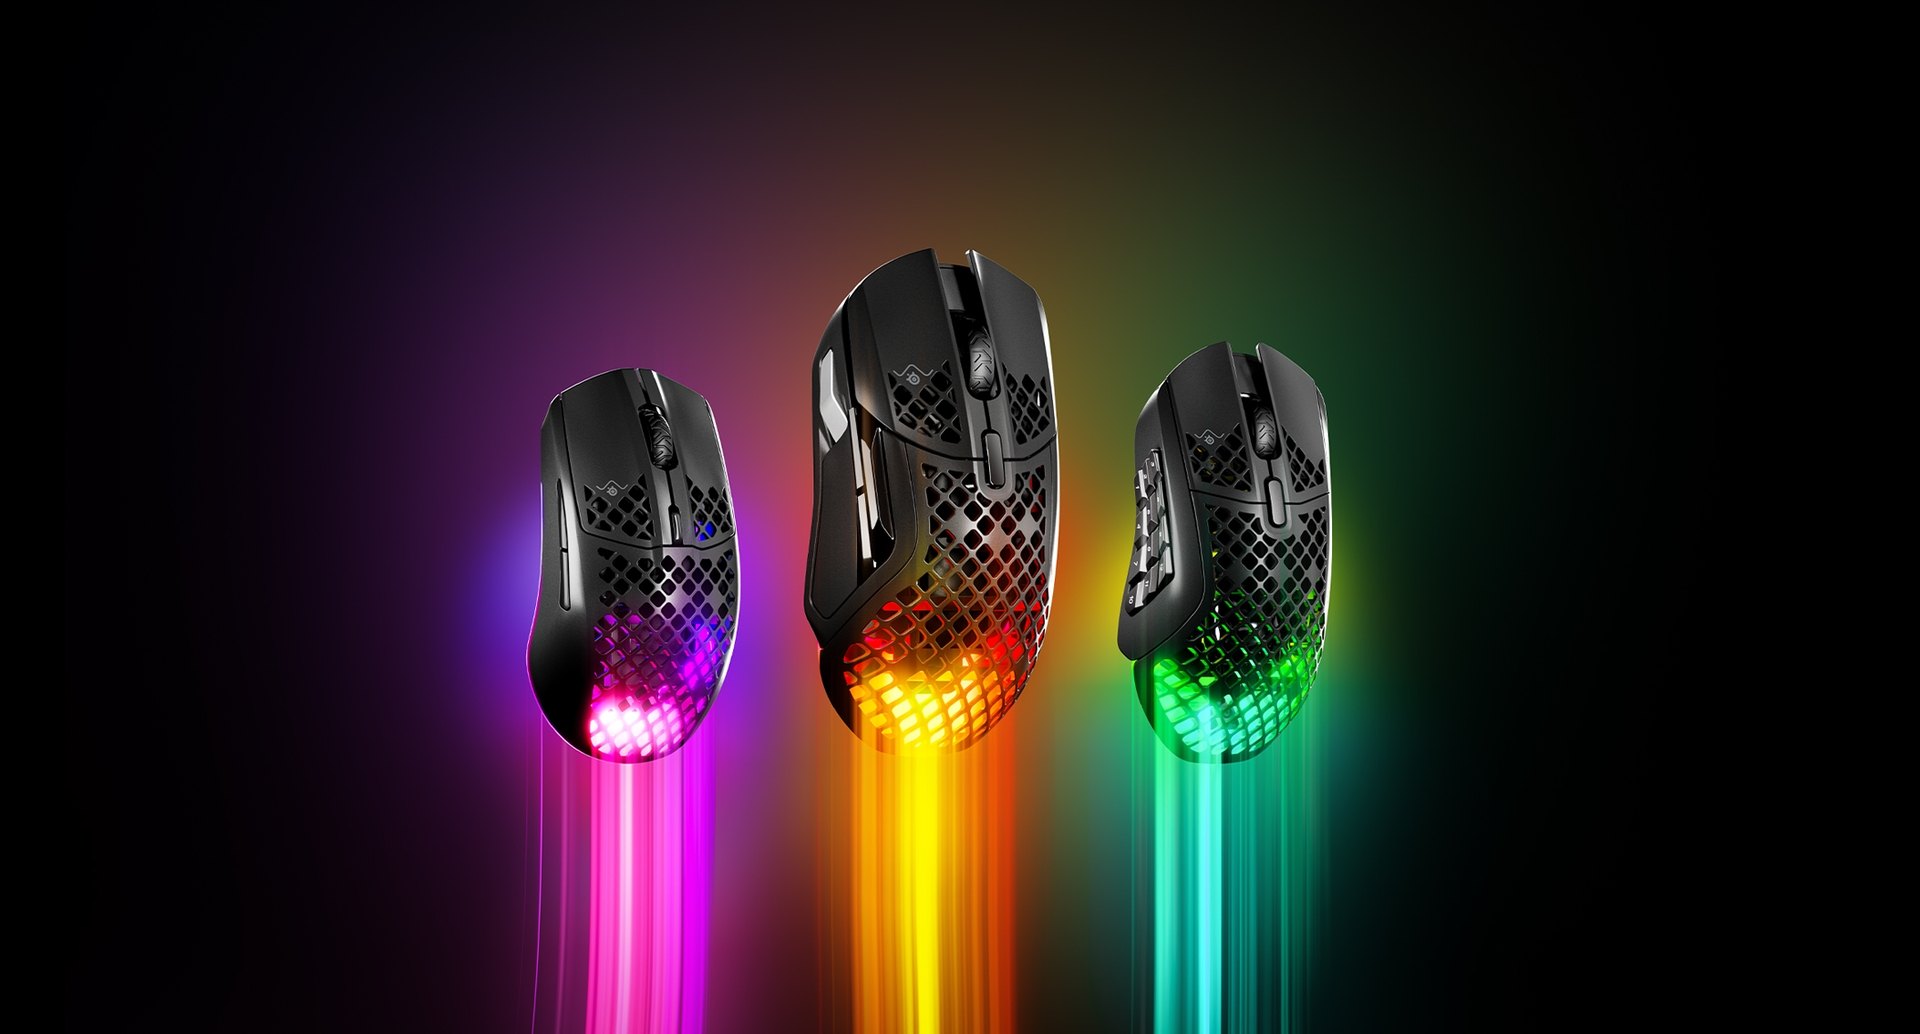 An Aerox 5, 5 wireless, and 9 wireless mouse with light beaming from the body.